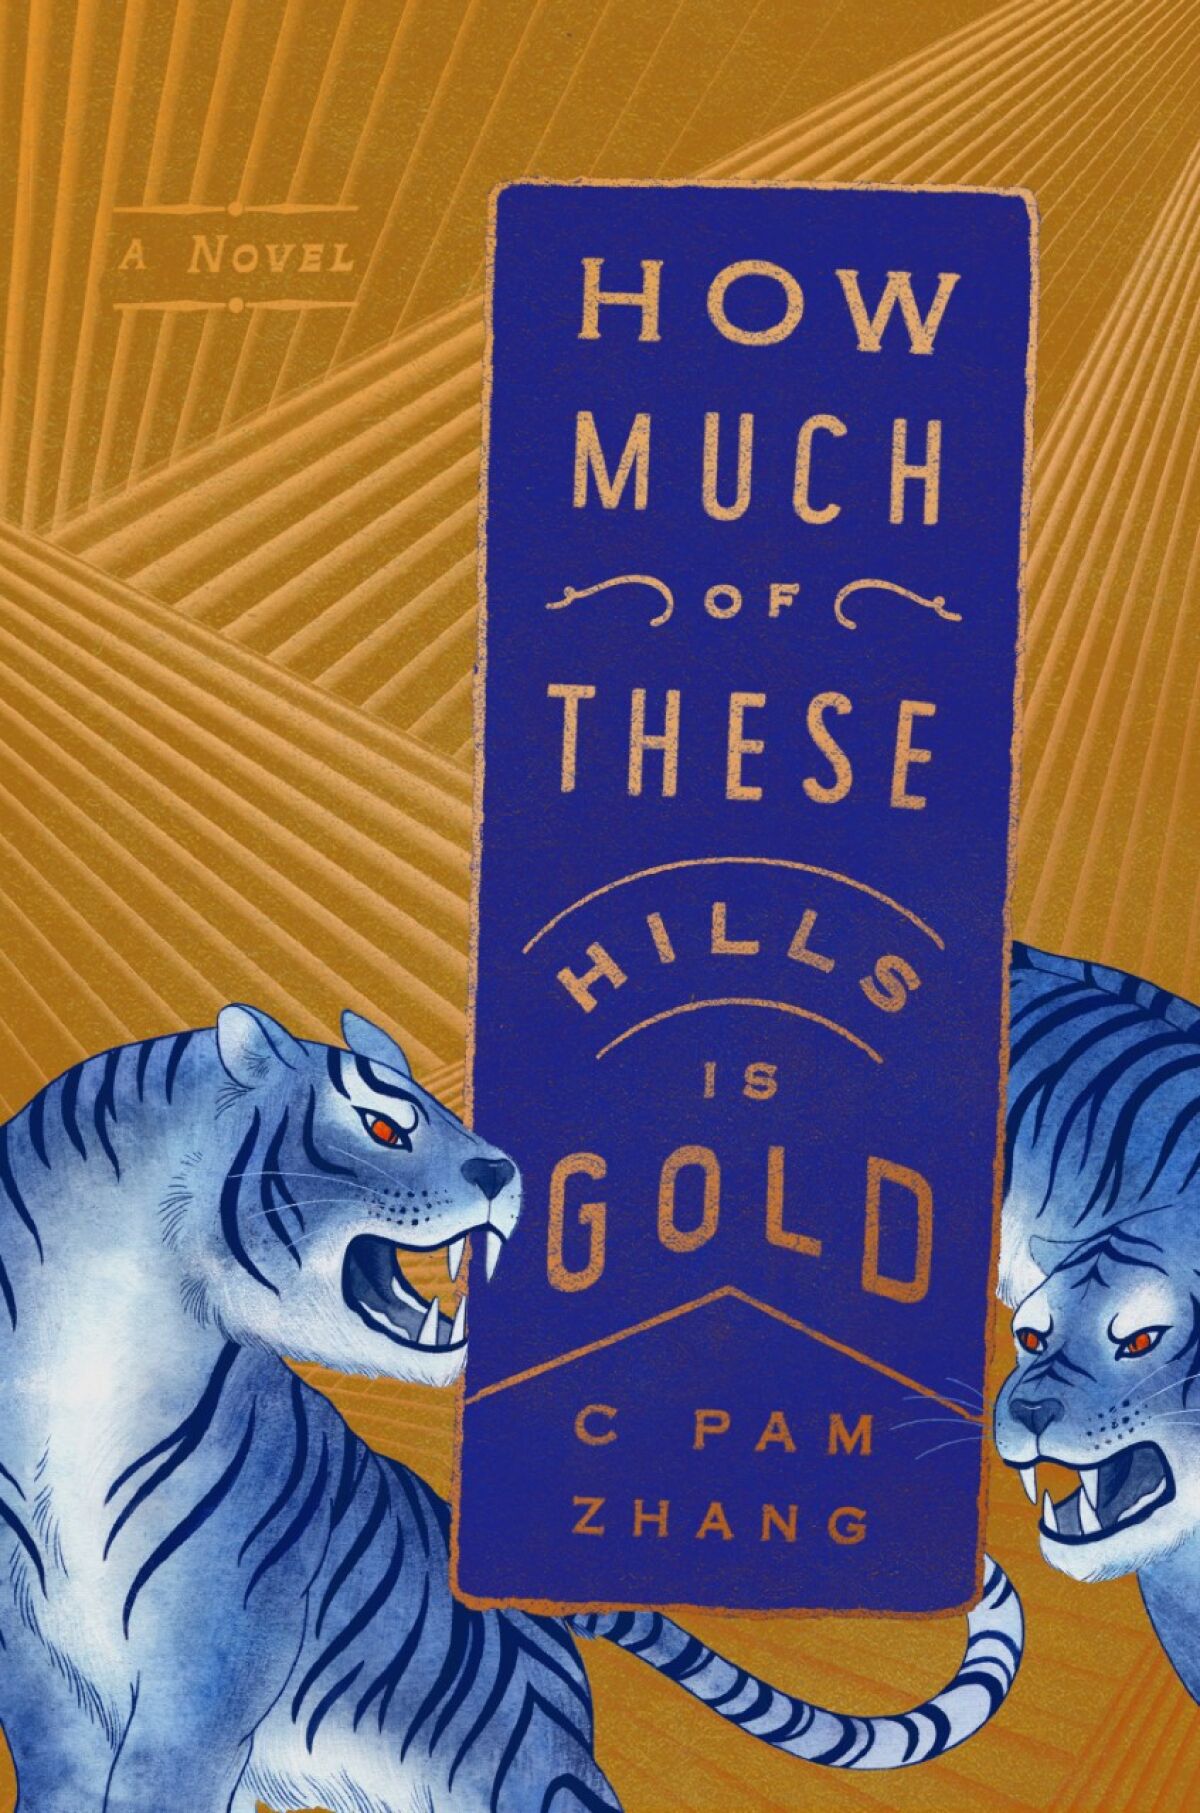 "How Much of These Hills is Gold," by C Pam Zhang